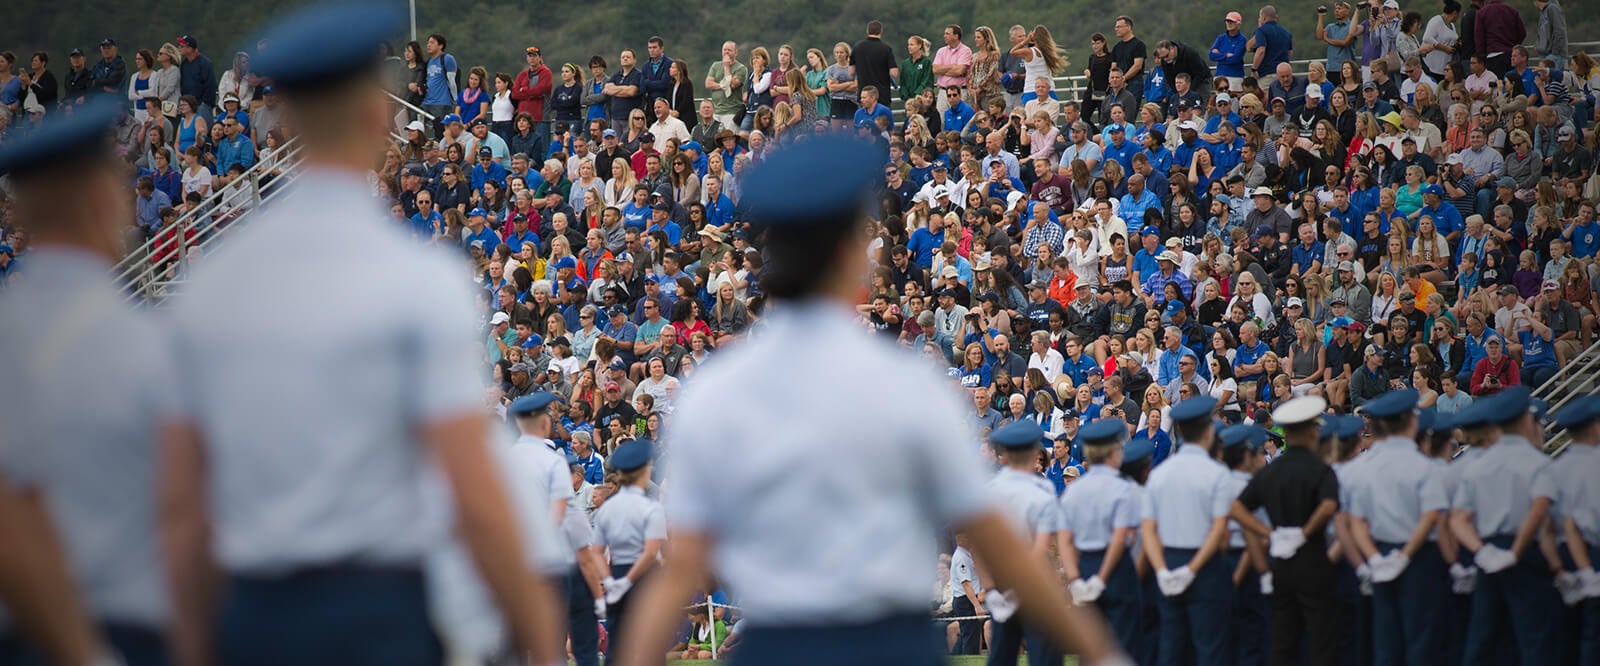 A group of students parading in front of a crowd during a Military Academy Parents Weekend.